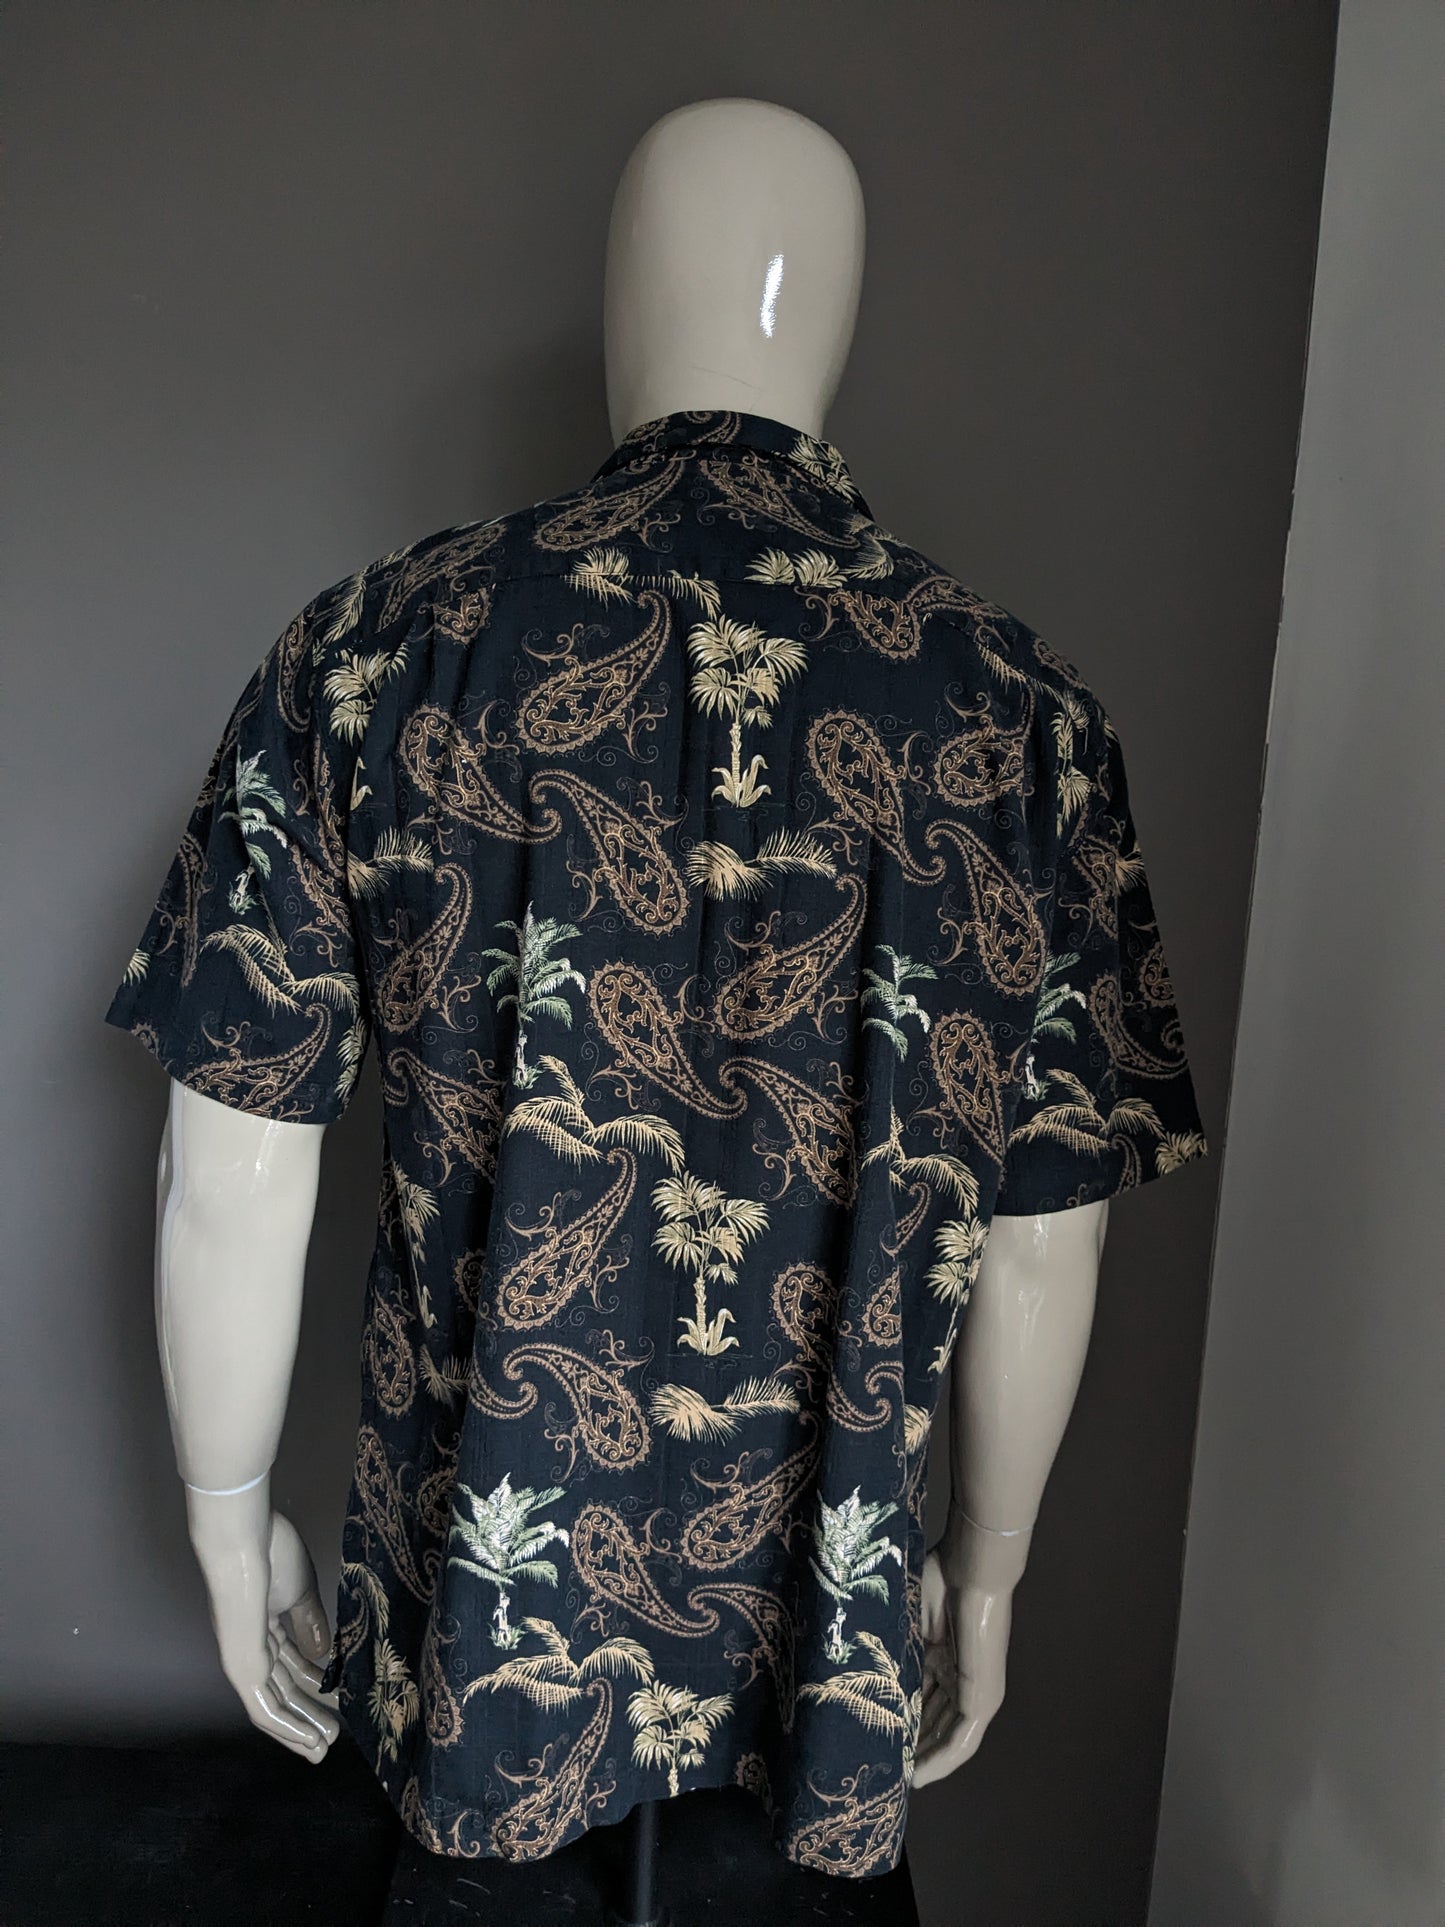 Vintage Clearwater Outfitters Shirt Hawaii Shirt Sleeve. Impression verte marron noir. Taille l / xl. 45% de viscose / rayonne